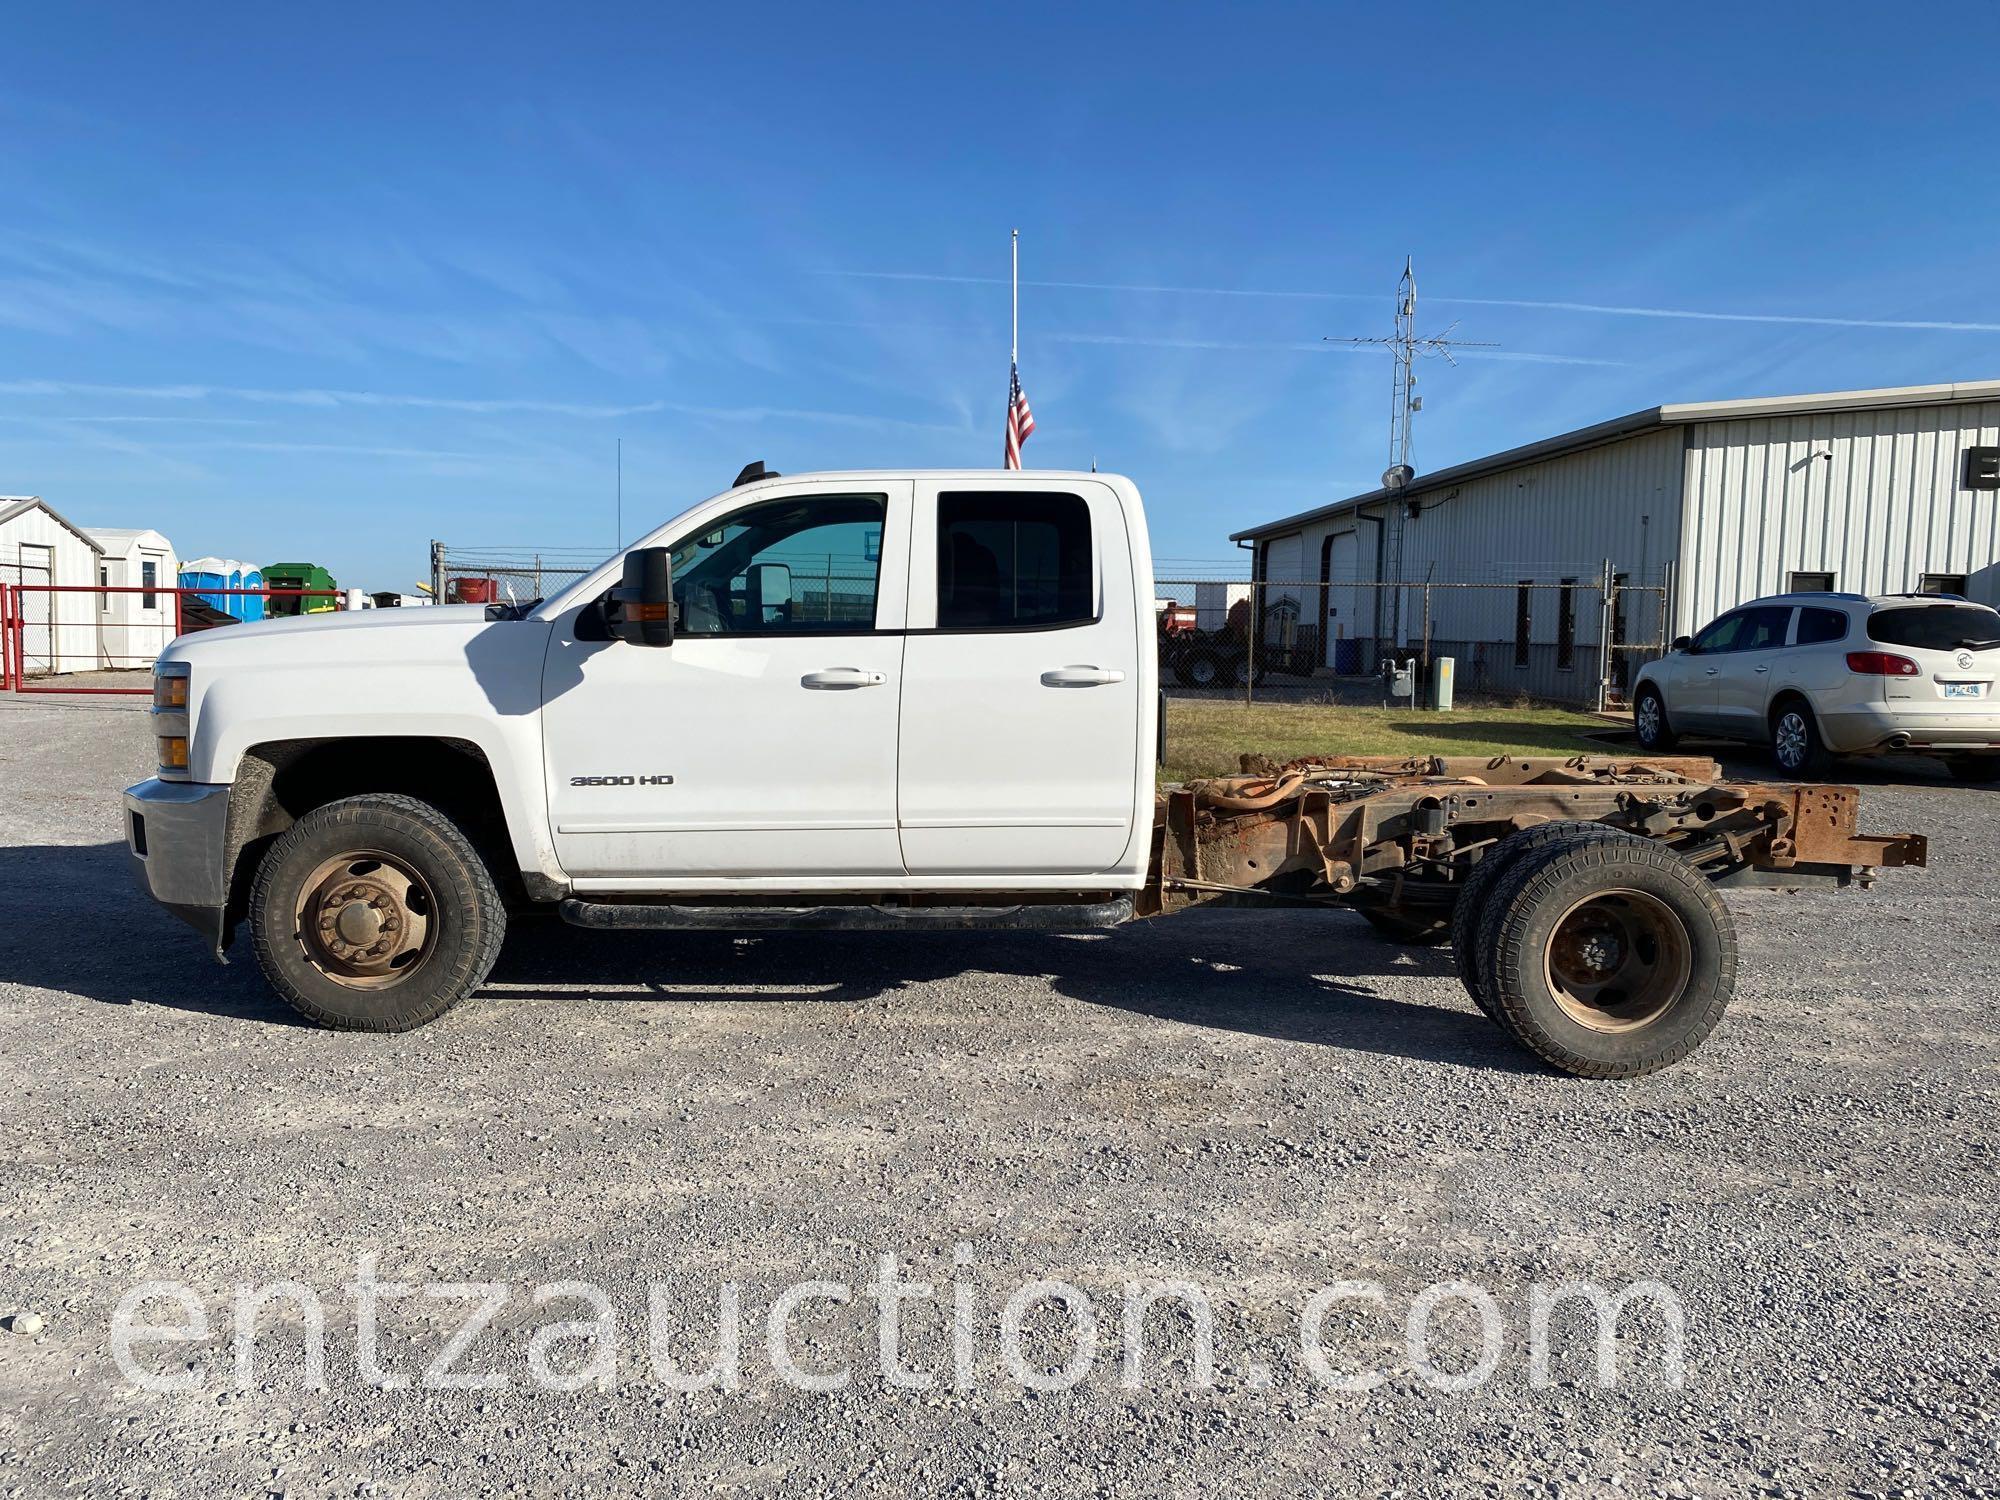 2015 CHEVY 3500 HD CAB & CHASSIS, 6.0L, 4X4, GAS,